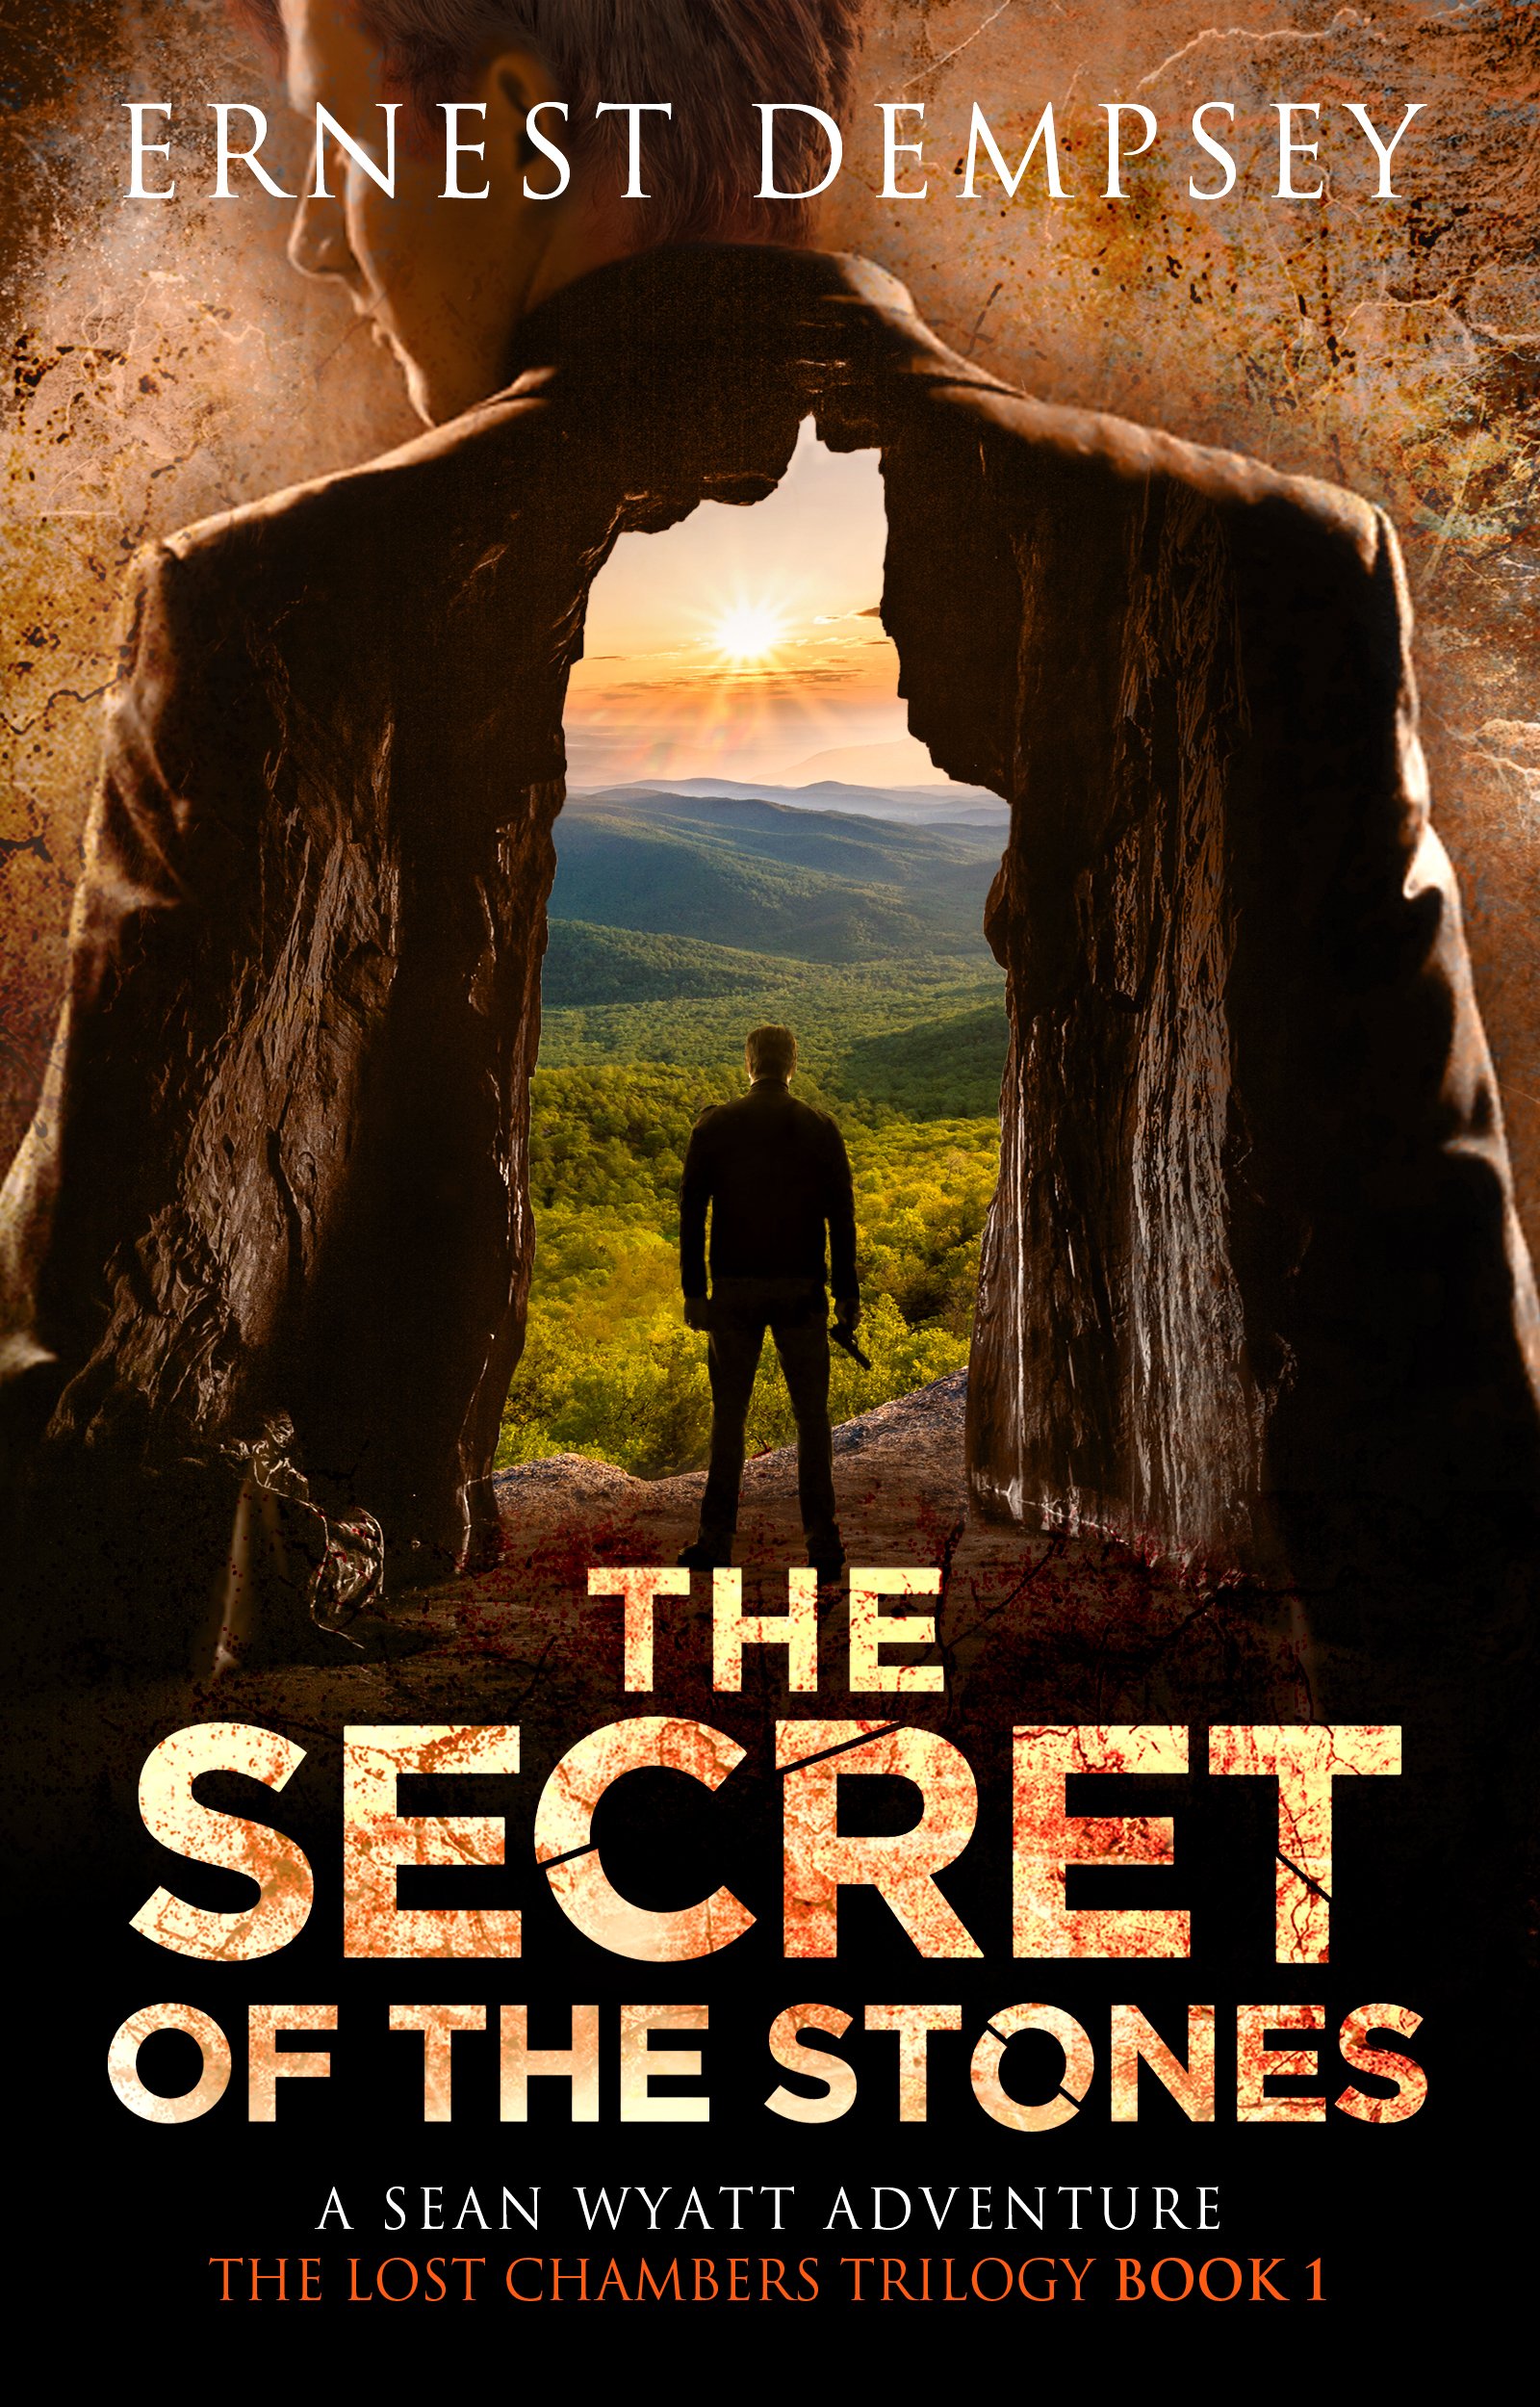 THE SECRET OF THE STONES NEW EBOOK COVER.jpg